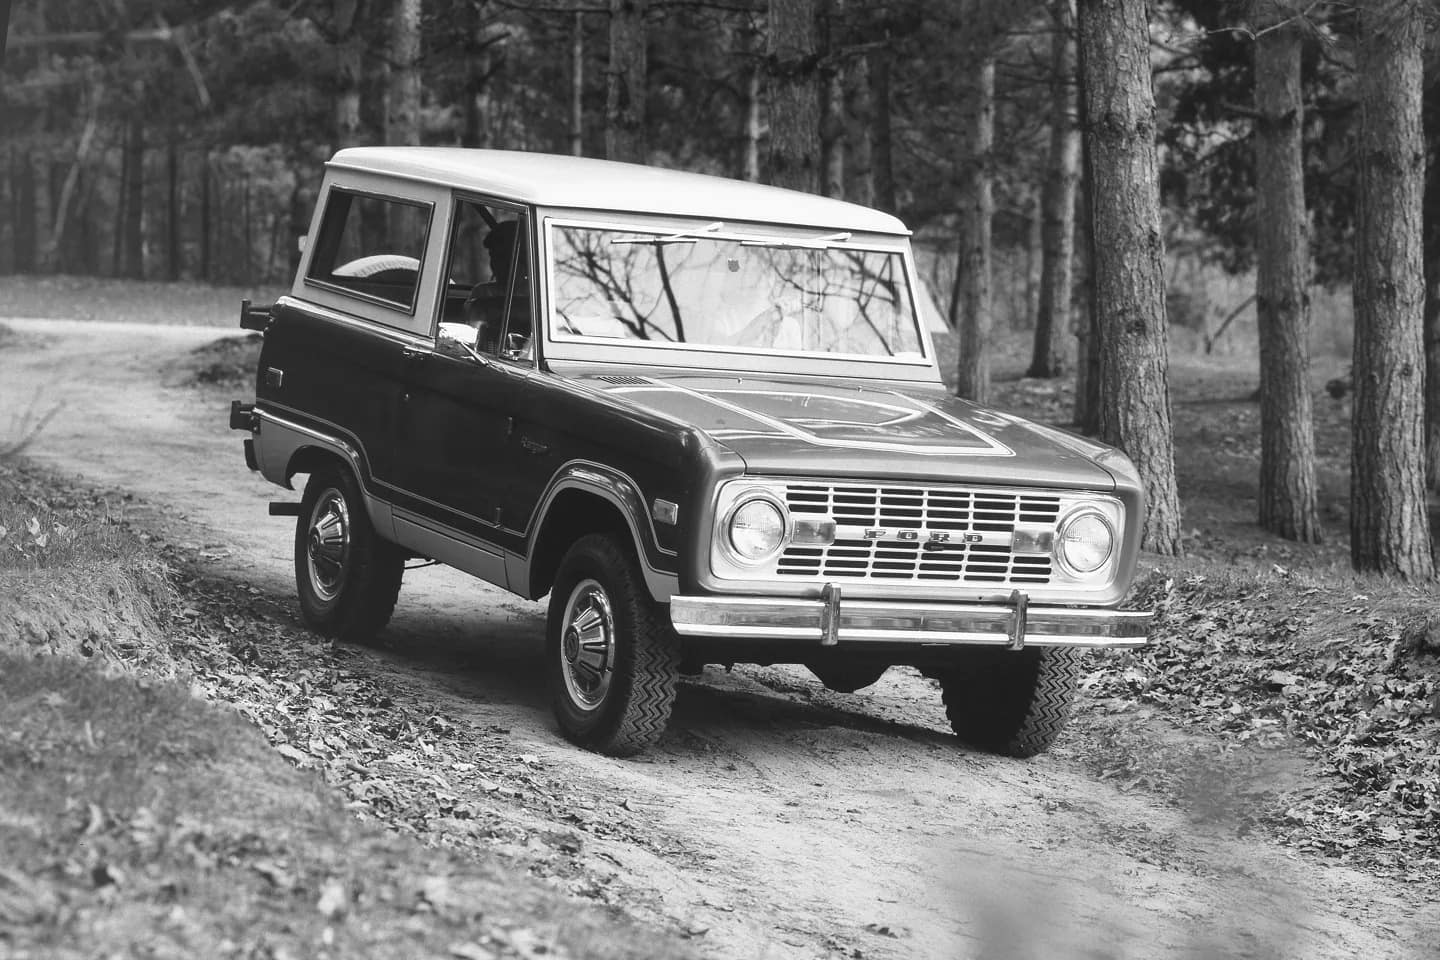 The trail-blazing design of the 1973 Ford Bronco Ranger.